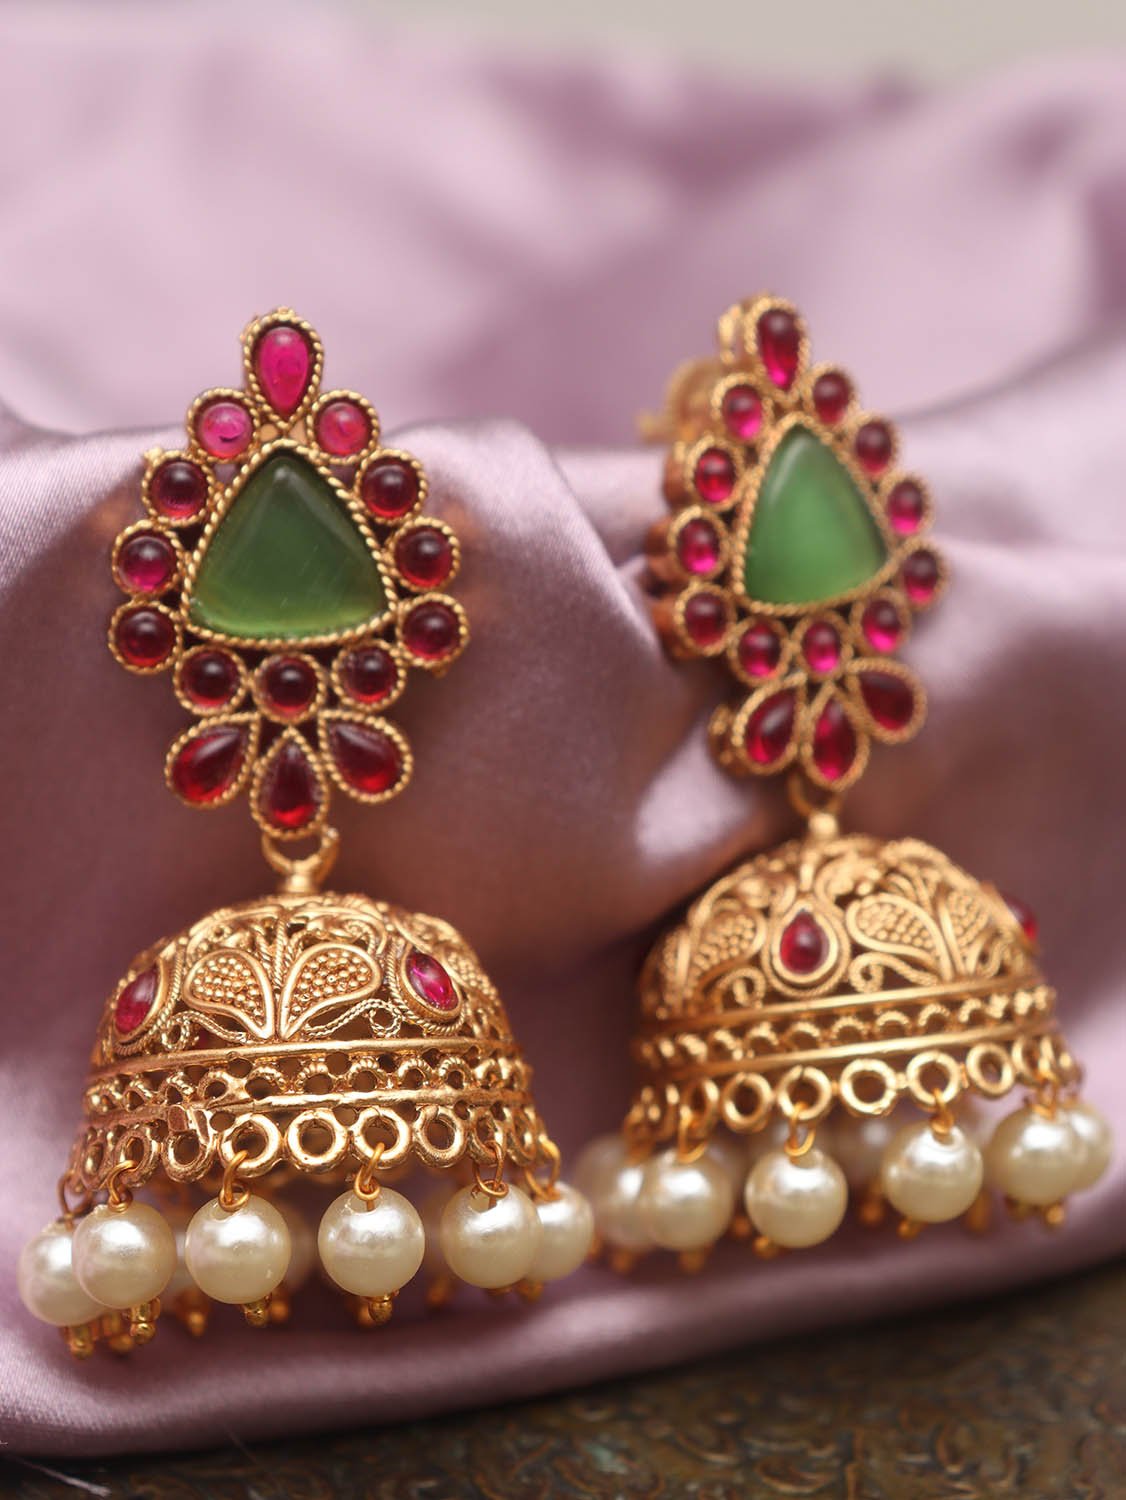 Divine Delicacy Earrings - Exquisite Accessories for Elegant Style